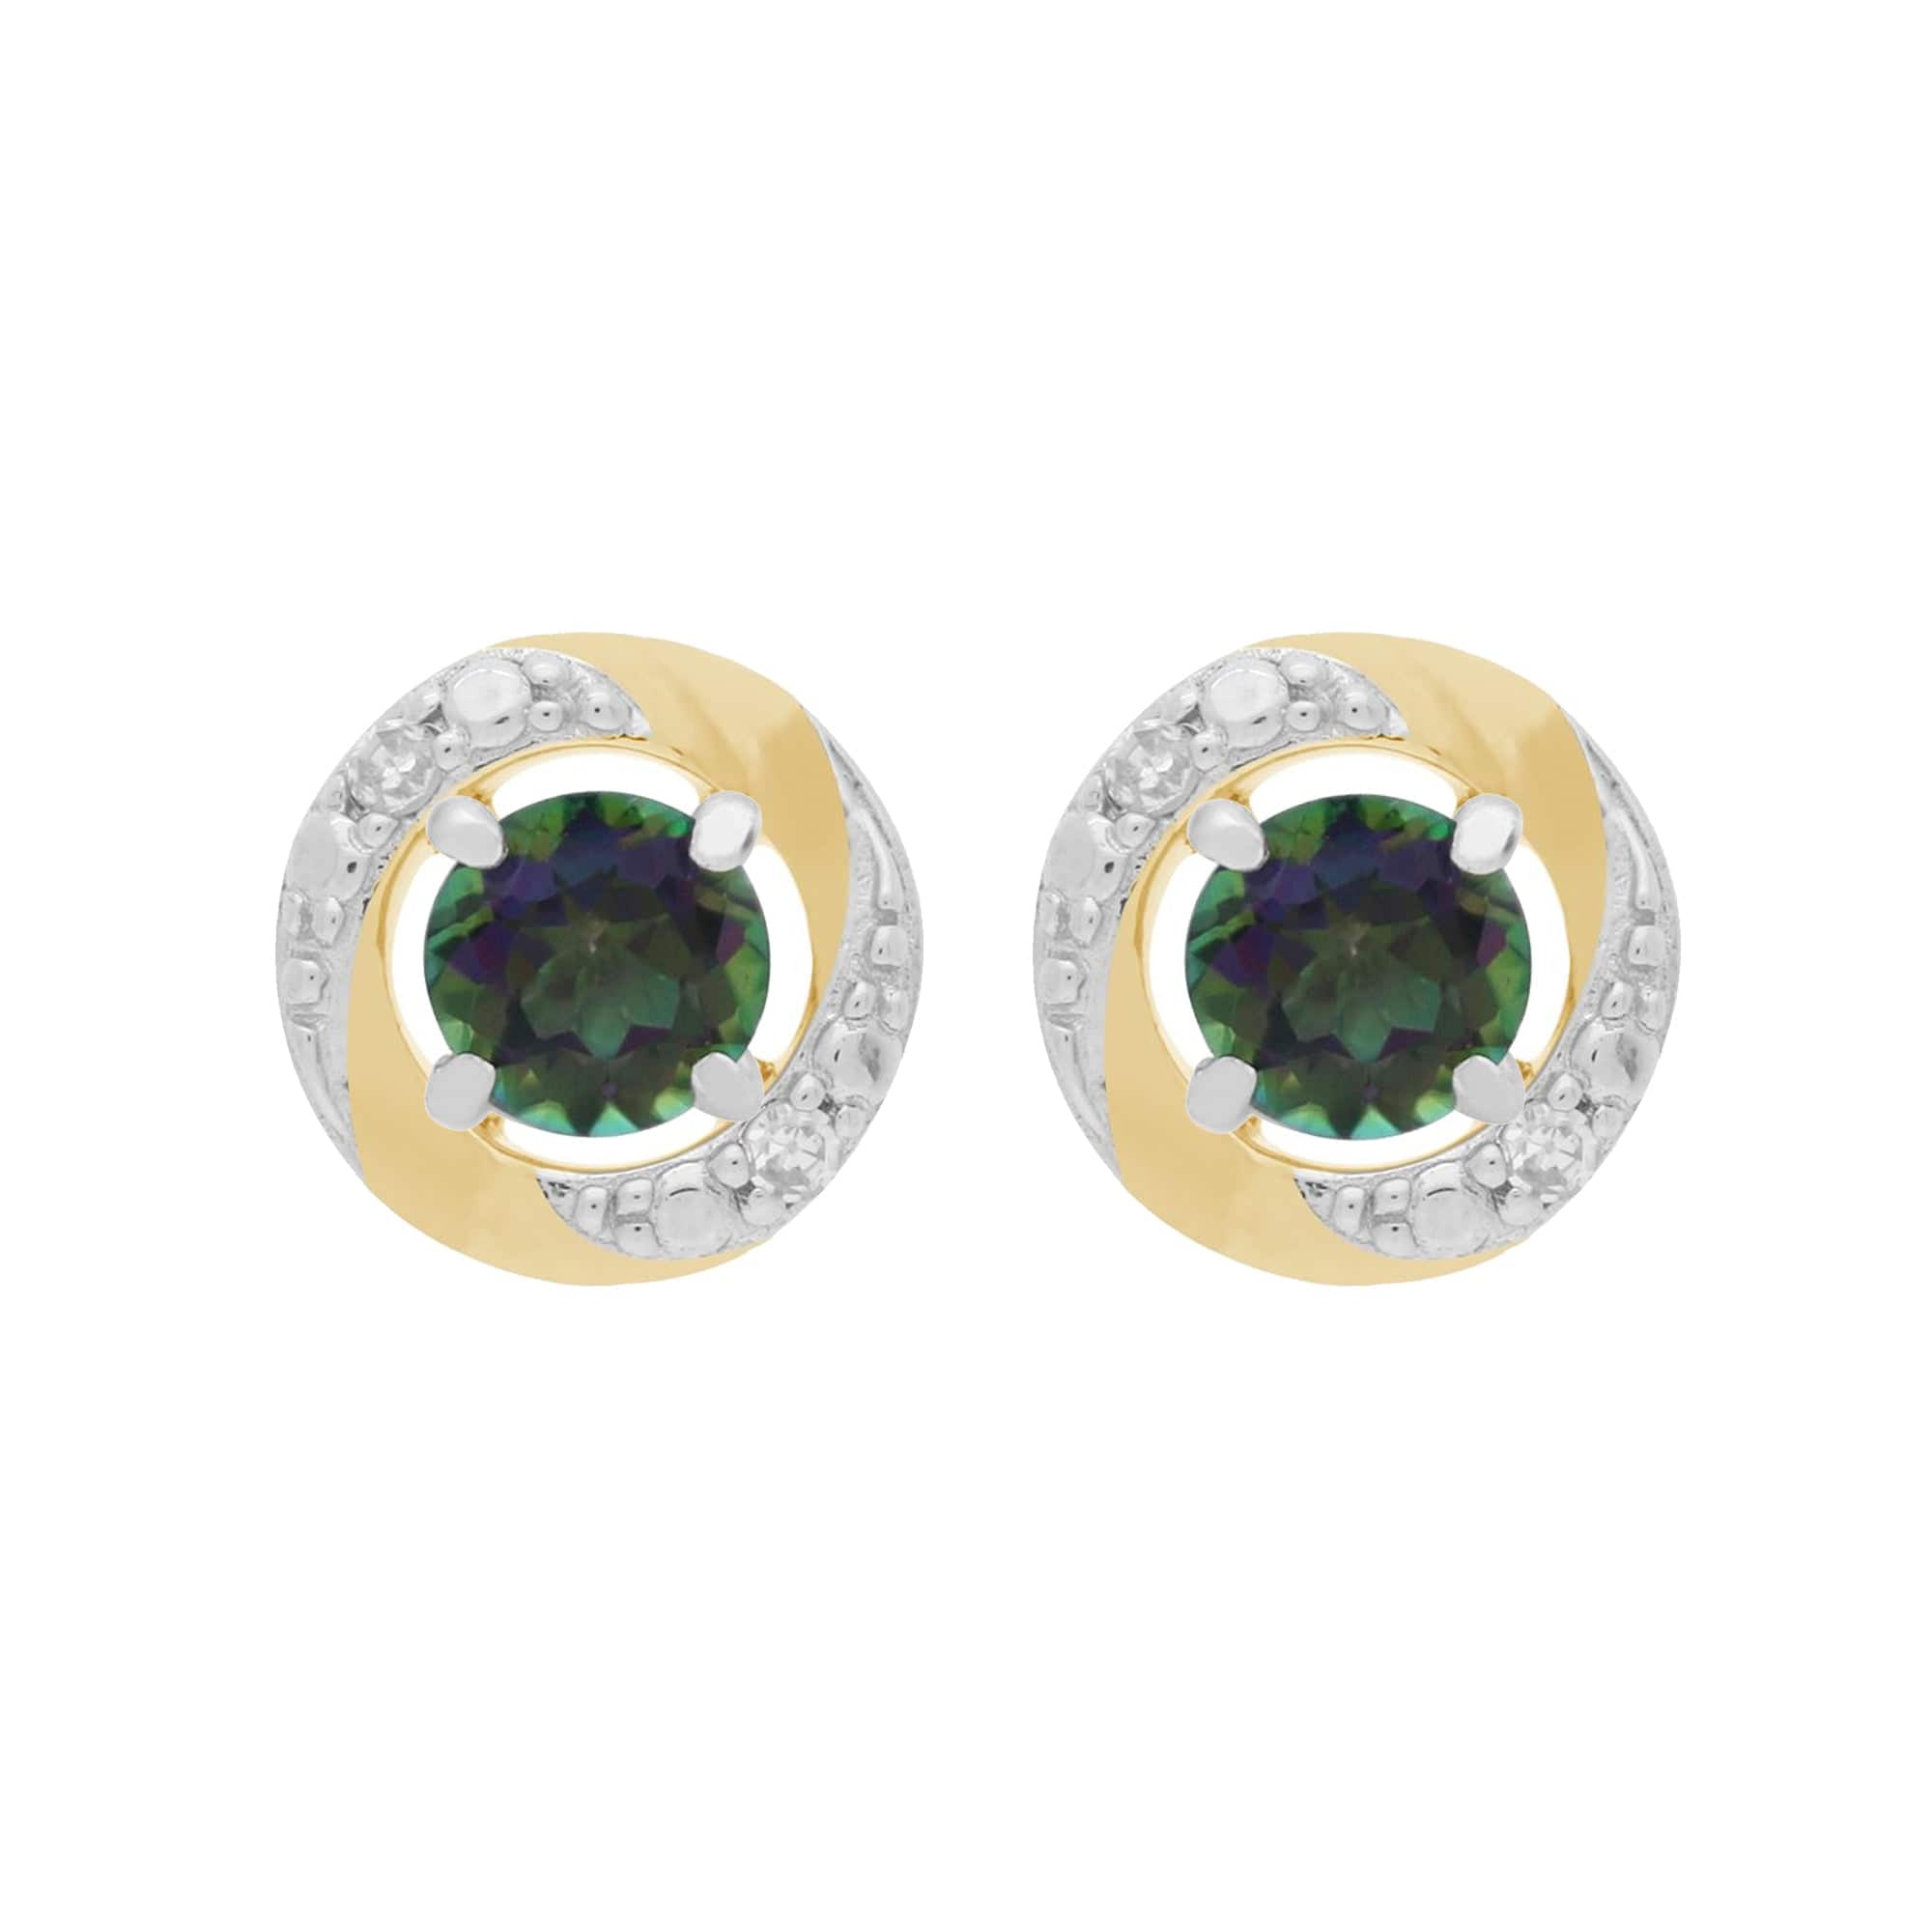 162E0071169-191E0374019 9ct White Gold Mystic Topaz Stud Earrings with Detachable Diamond Halo Ear Jacket in 9ct Yellow Gold 1